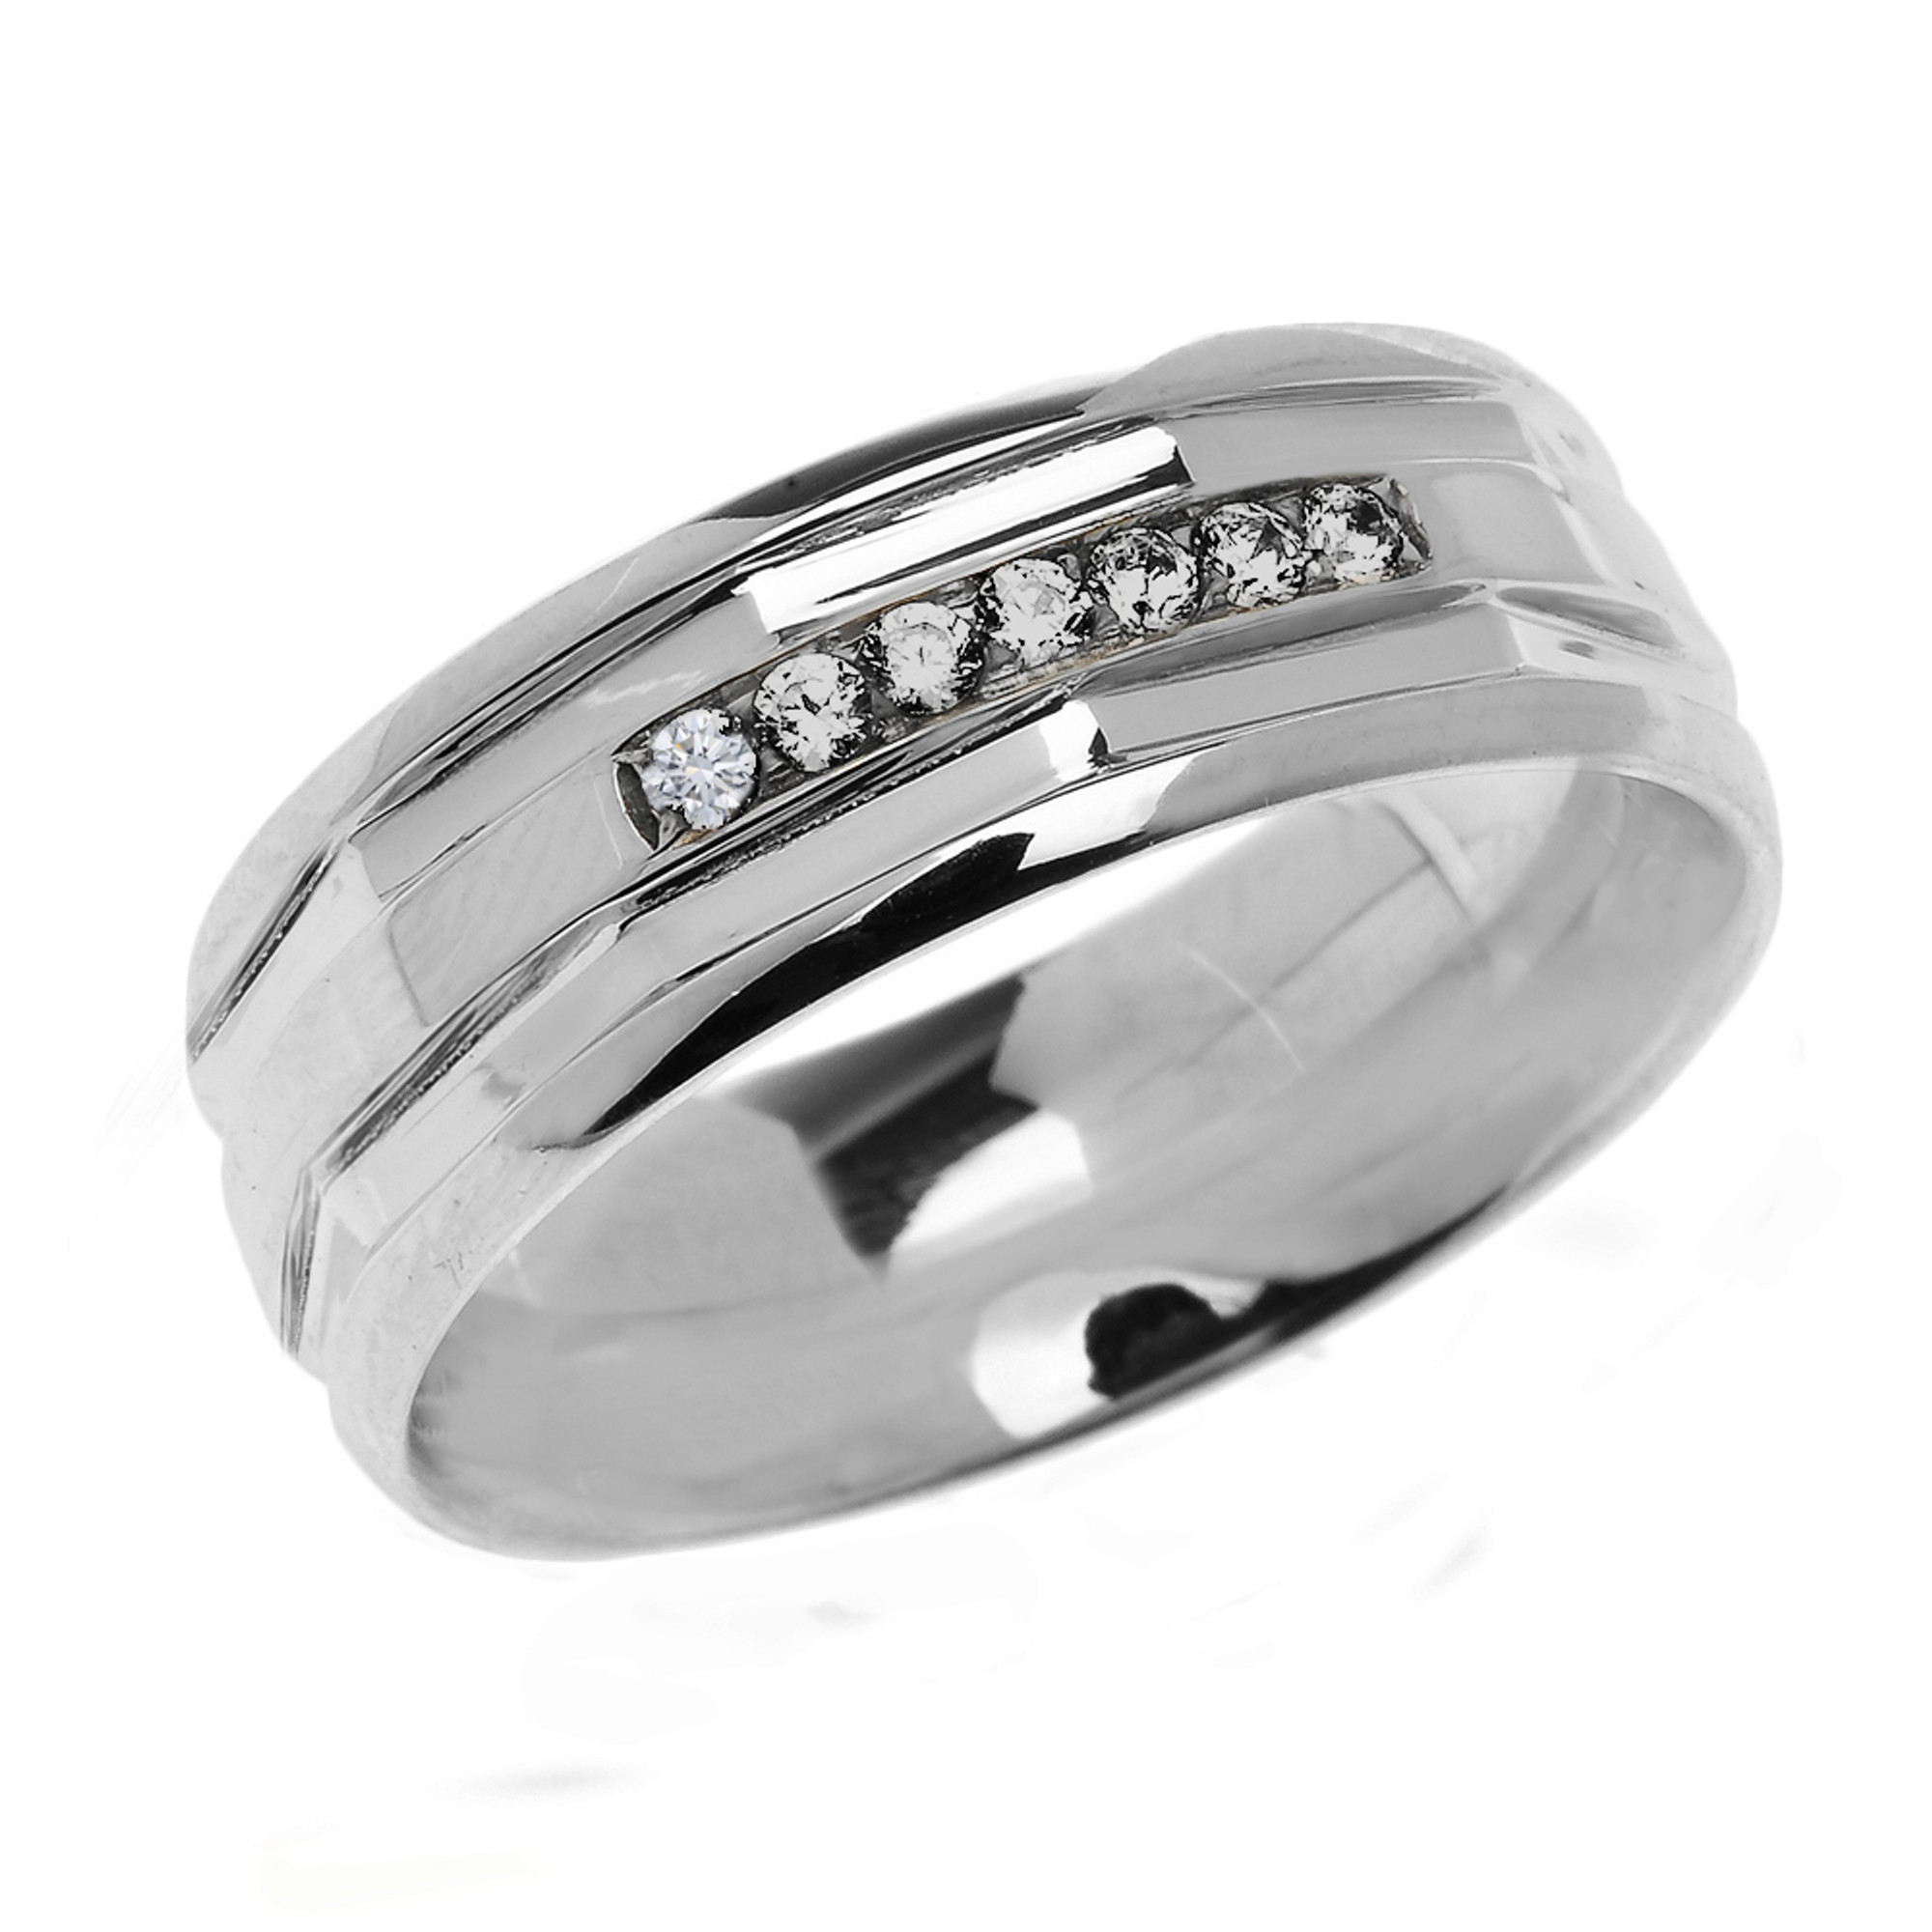 Sterling Silver Comfort Fit Modern Wedding Band with Diamonds